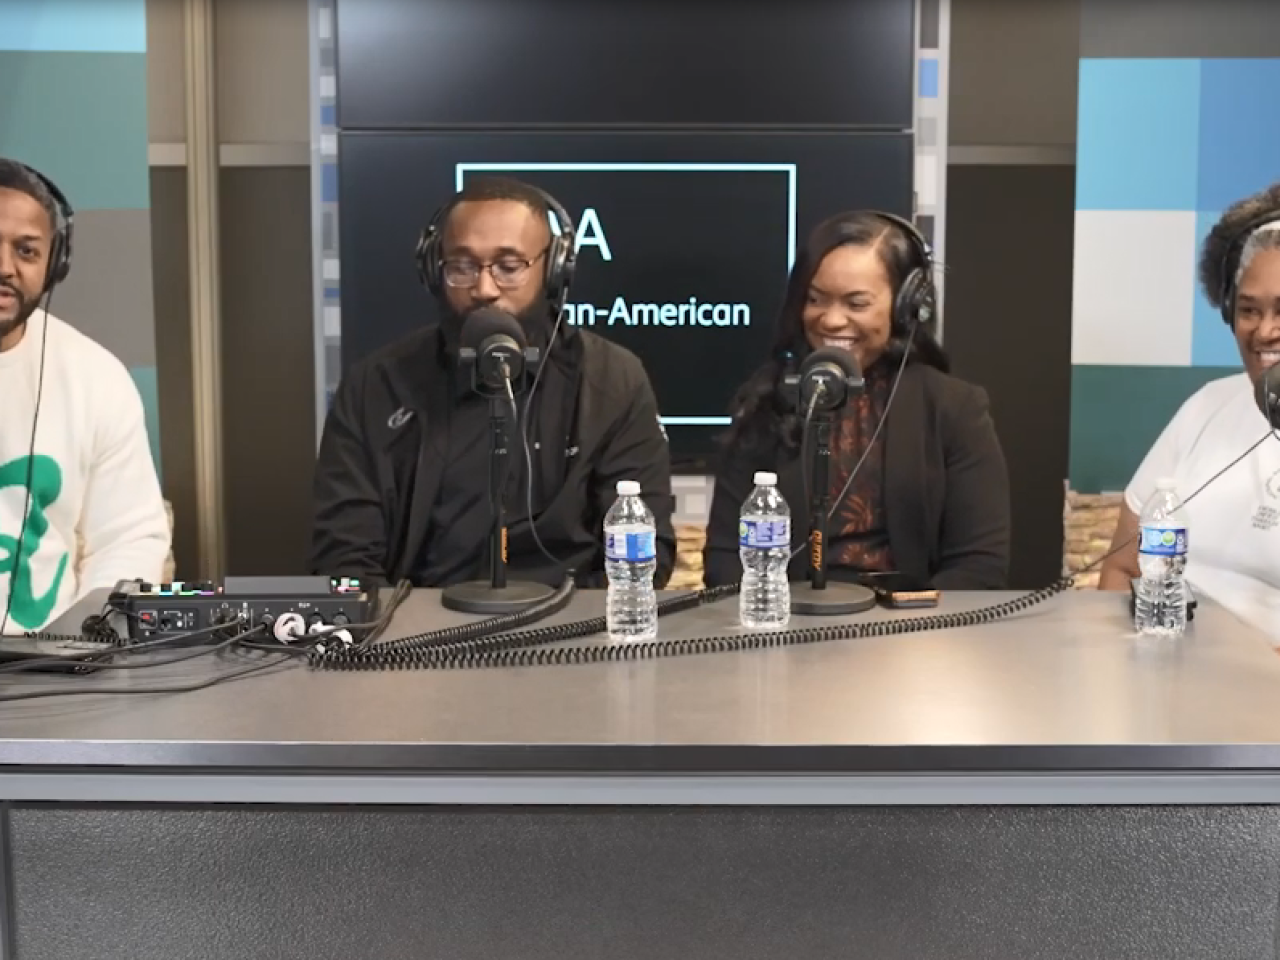 Four people with headsets and microphones, sitting at a desk.